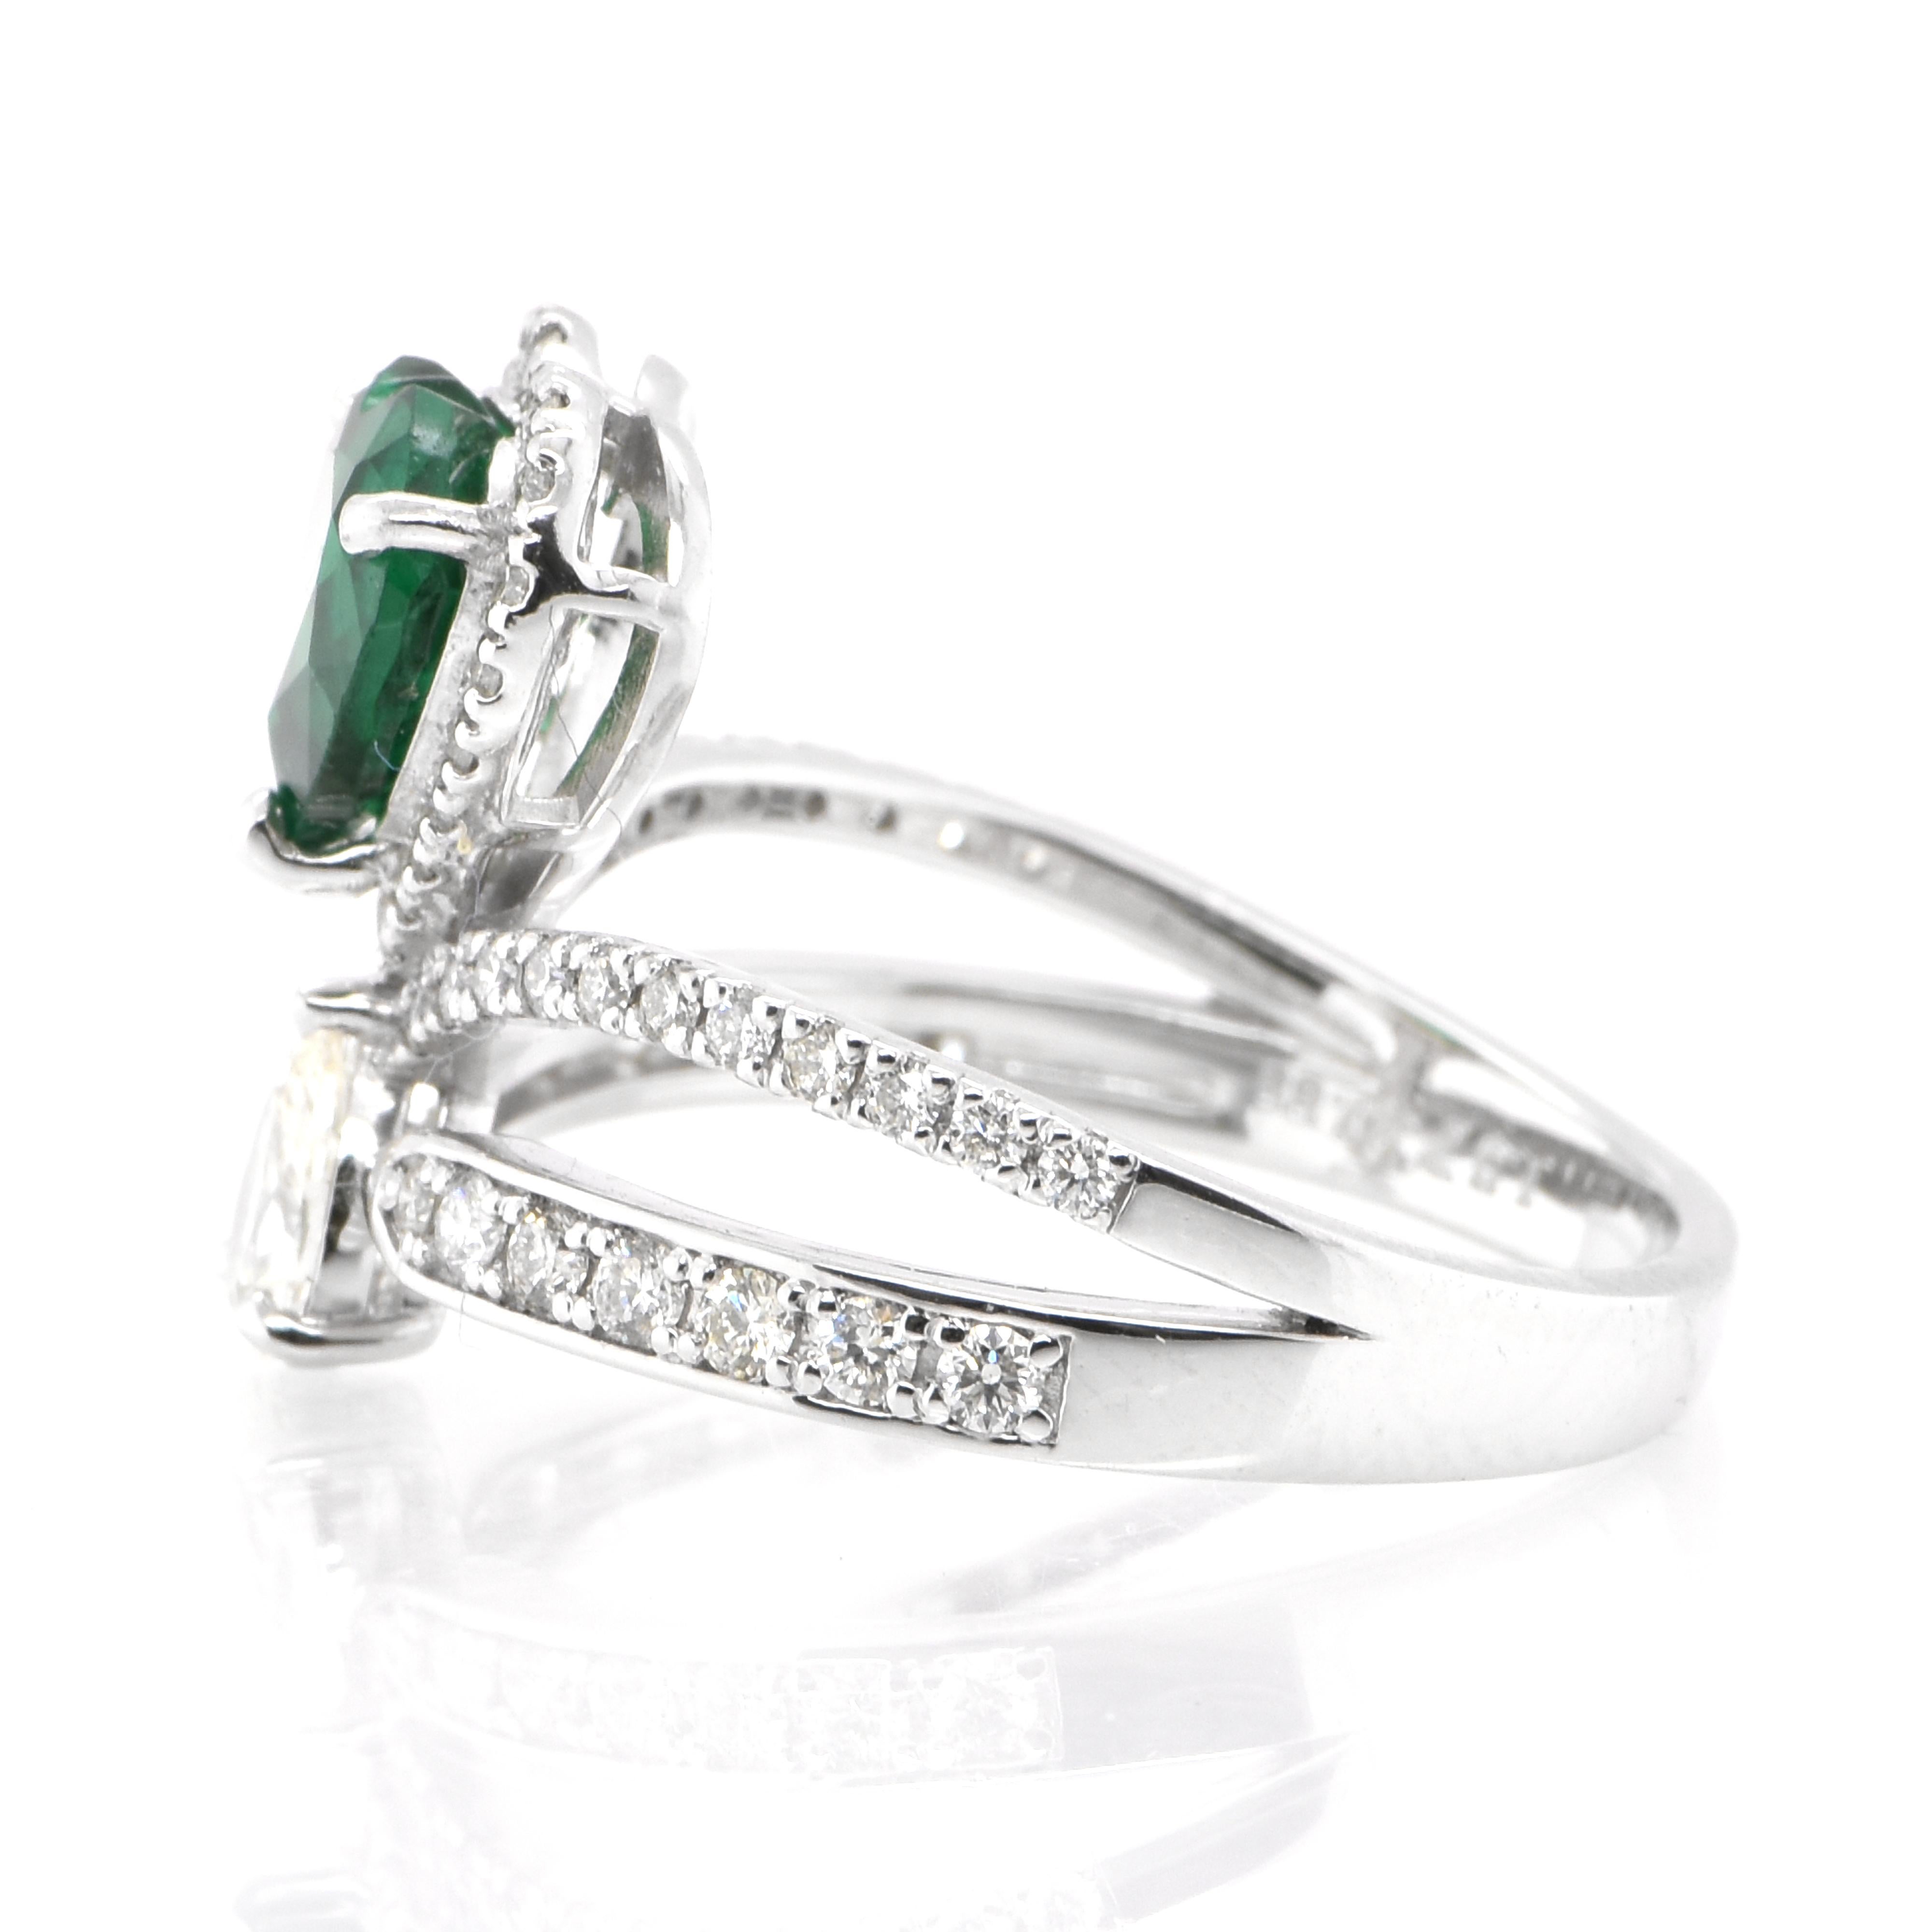 Modern 1.07 Carat Natural Heart Shape Emerald and Diamond Cocktail Ring Set in Platinum For Sale